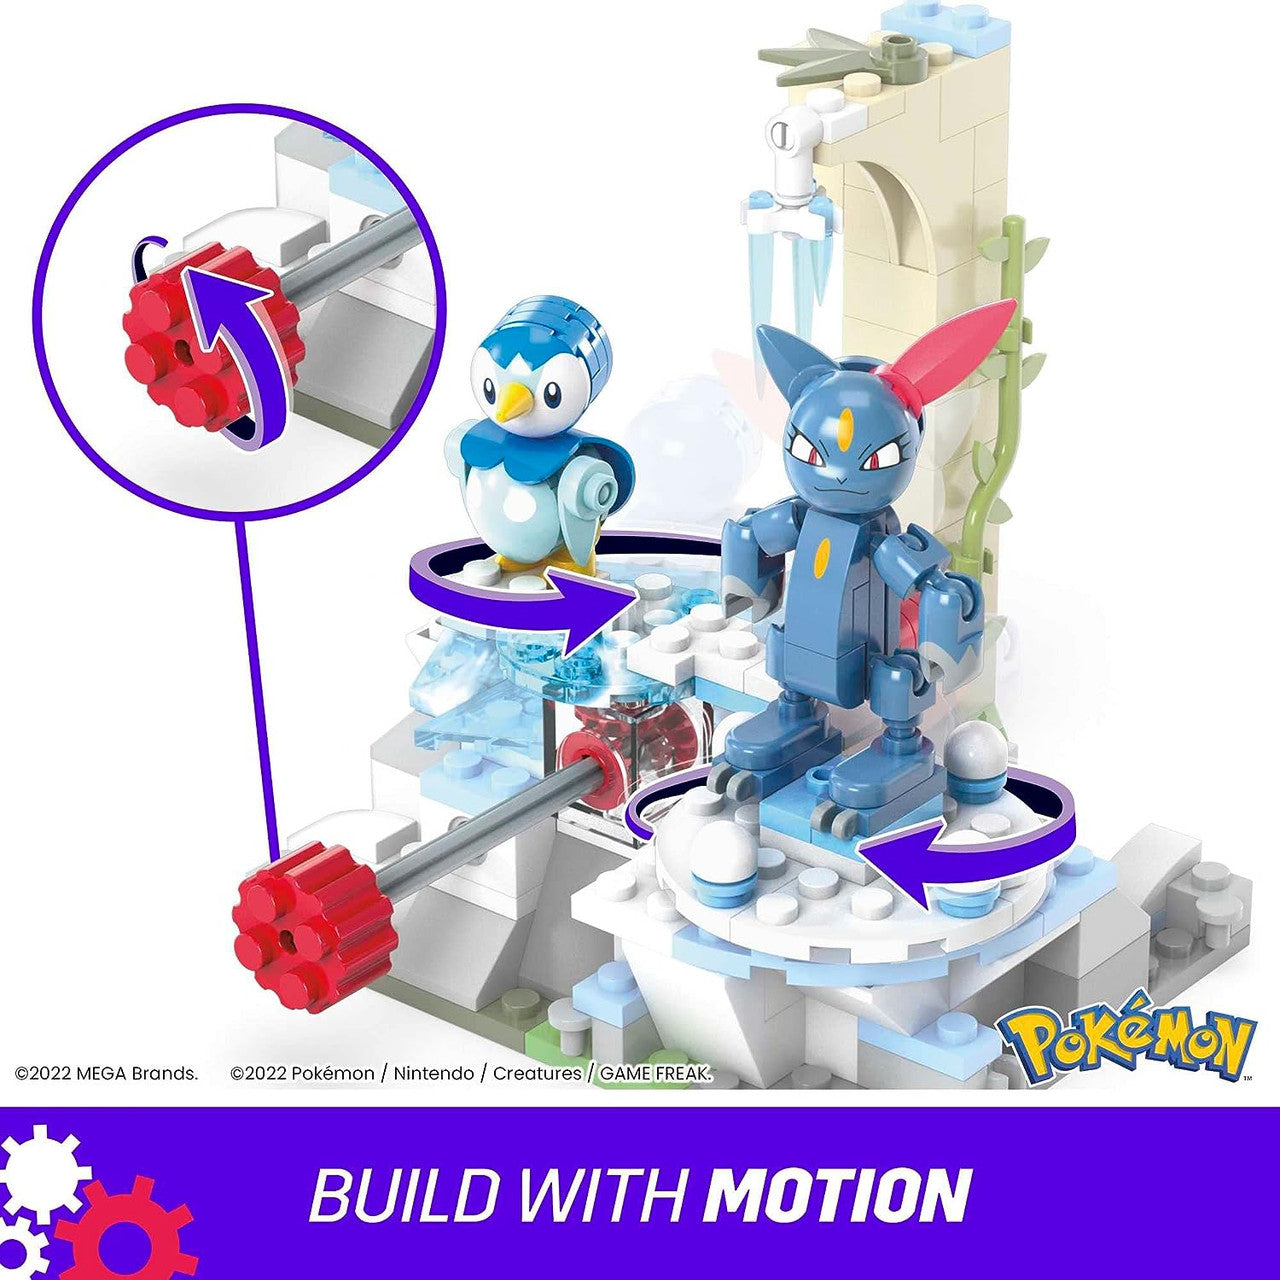 Mattel - Pokemon Mega: Piplup and Sneasel's Snow Day